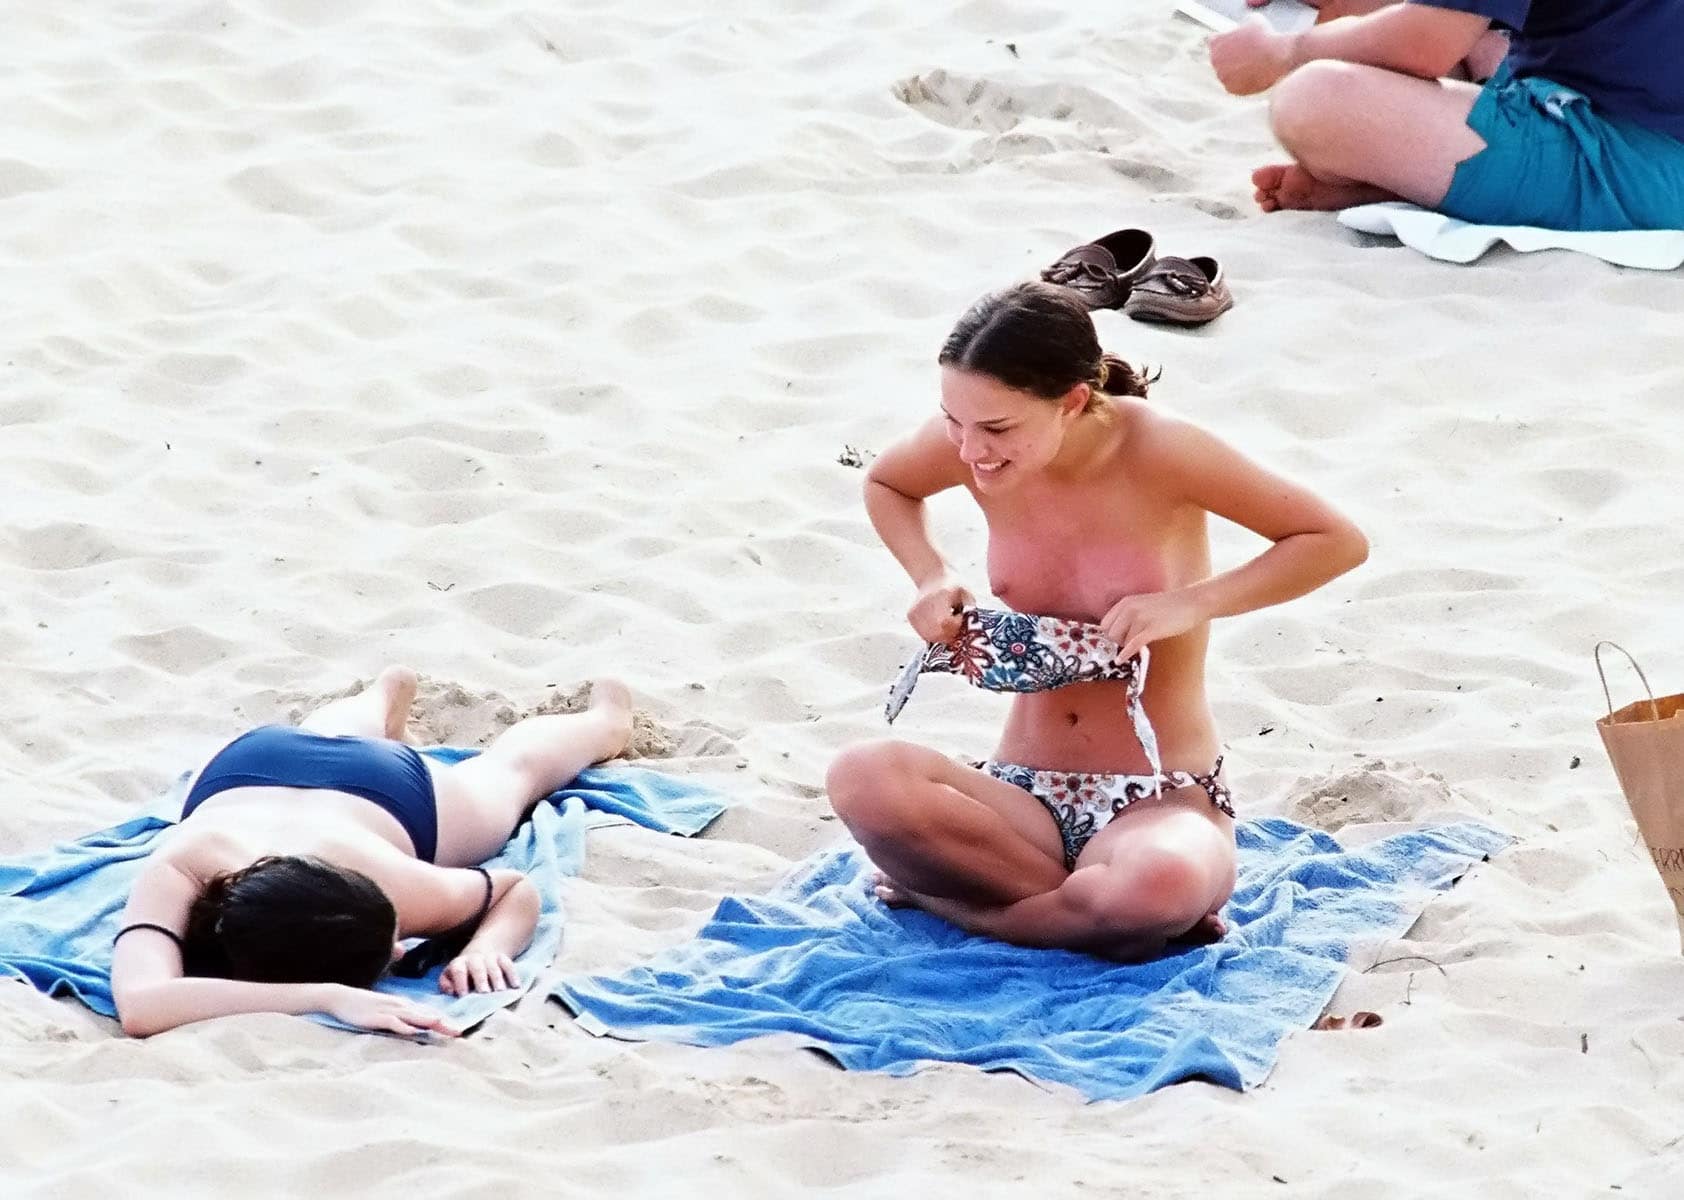 The famous Natalie Portman putting her top back on at the beach